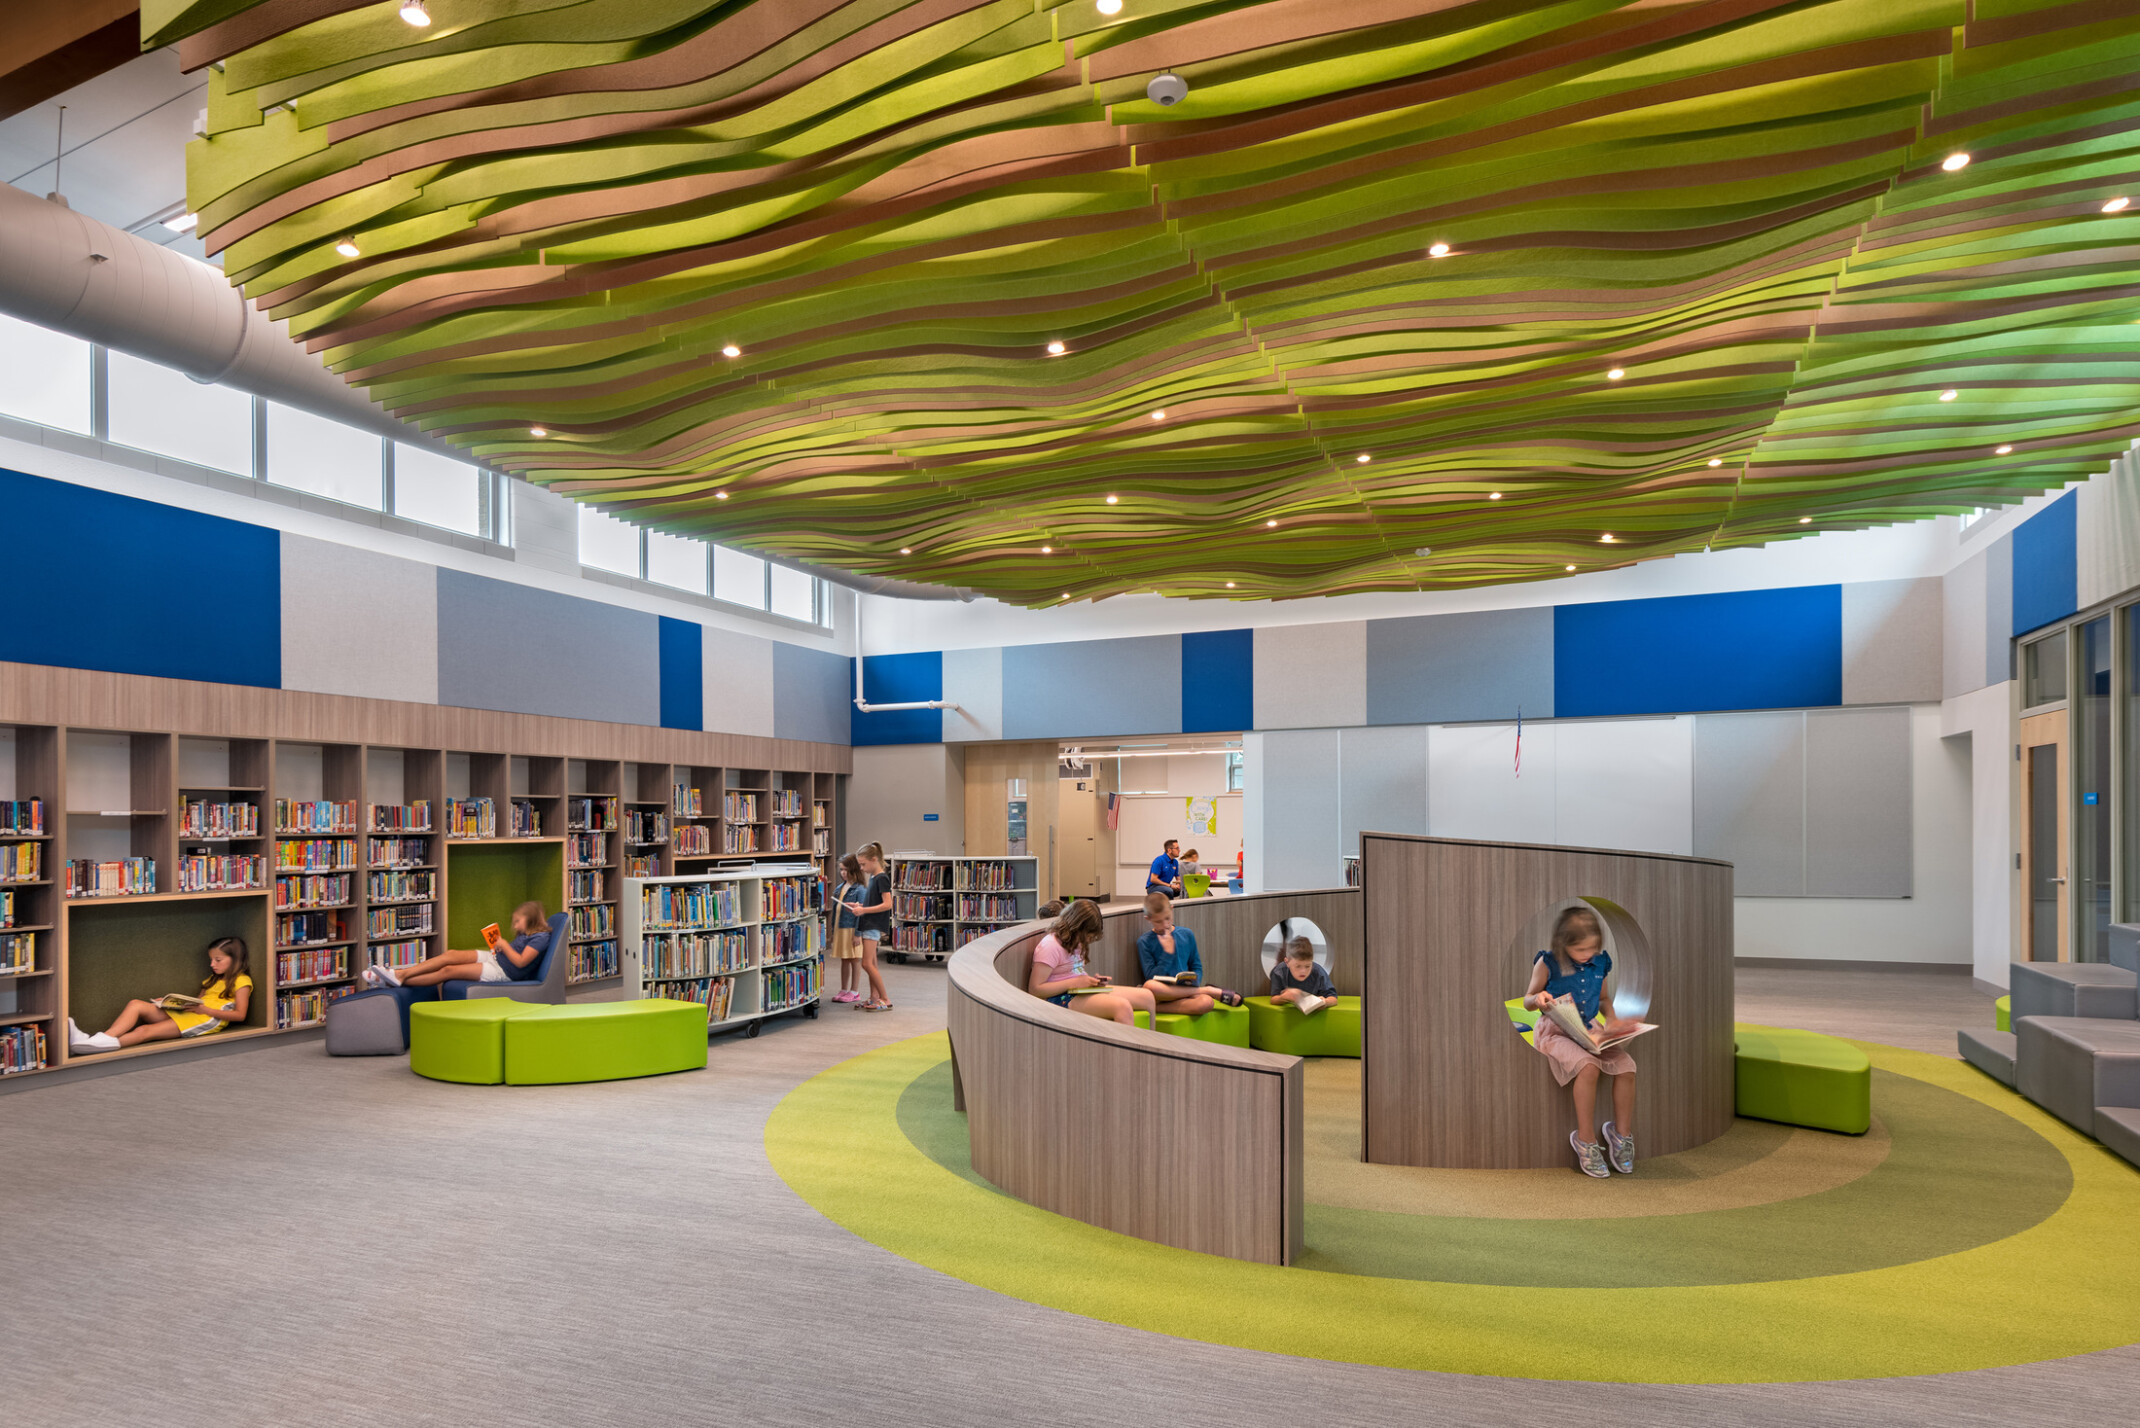 Clara Peterson Elementary School library, mixed comfortbale seating and reading nooks, wavy baffles overhead